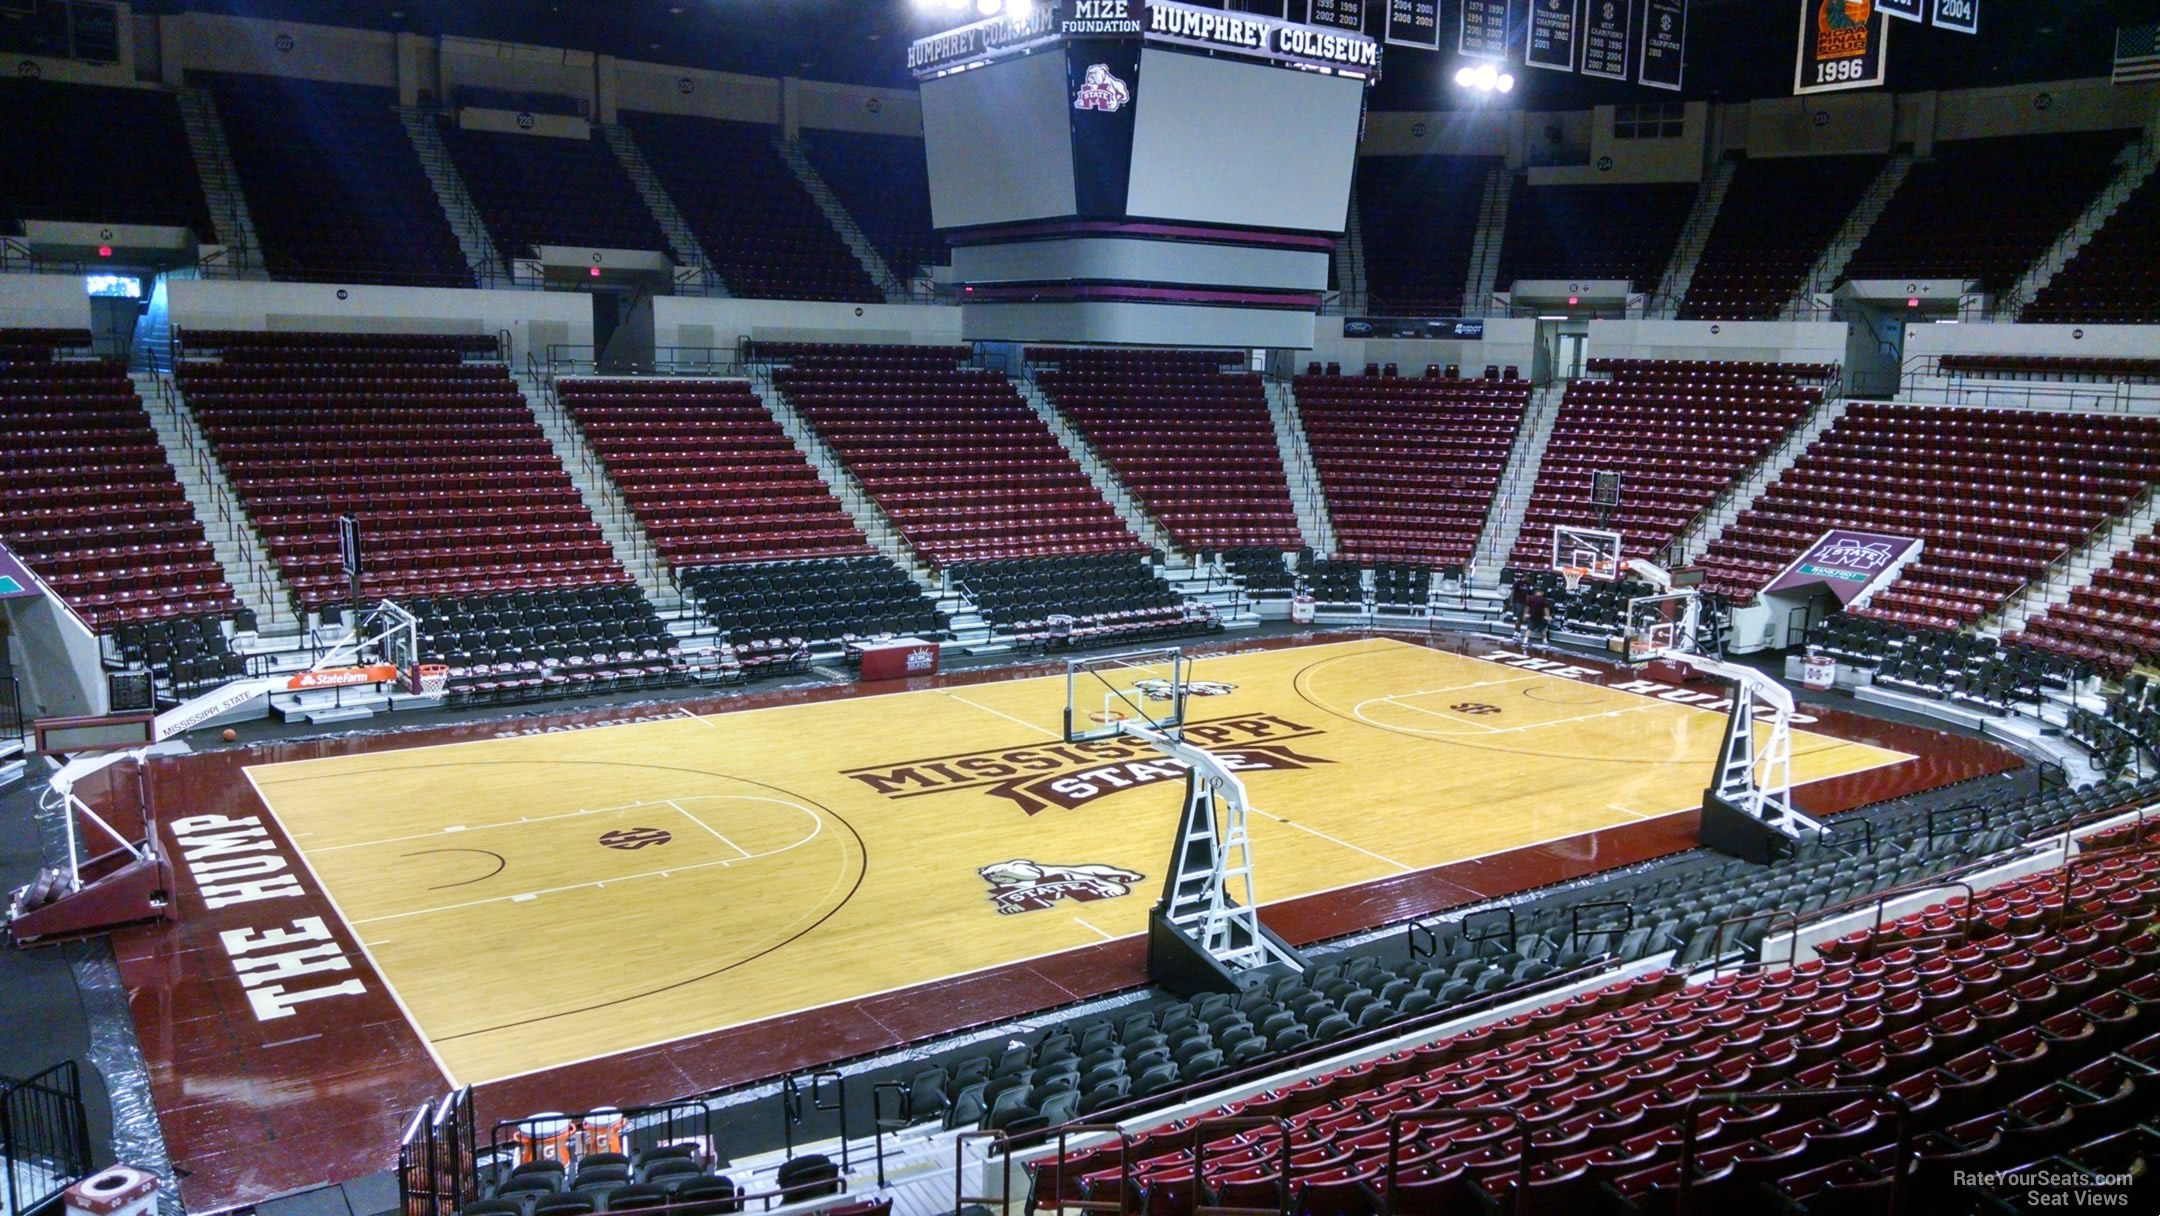 section 108, row 15 seat view  - humphrey coliseum